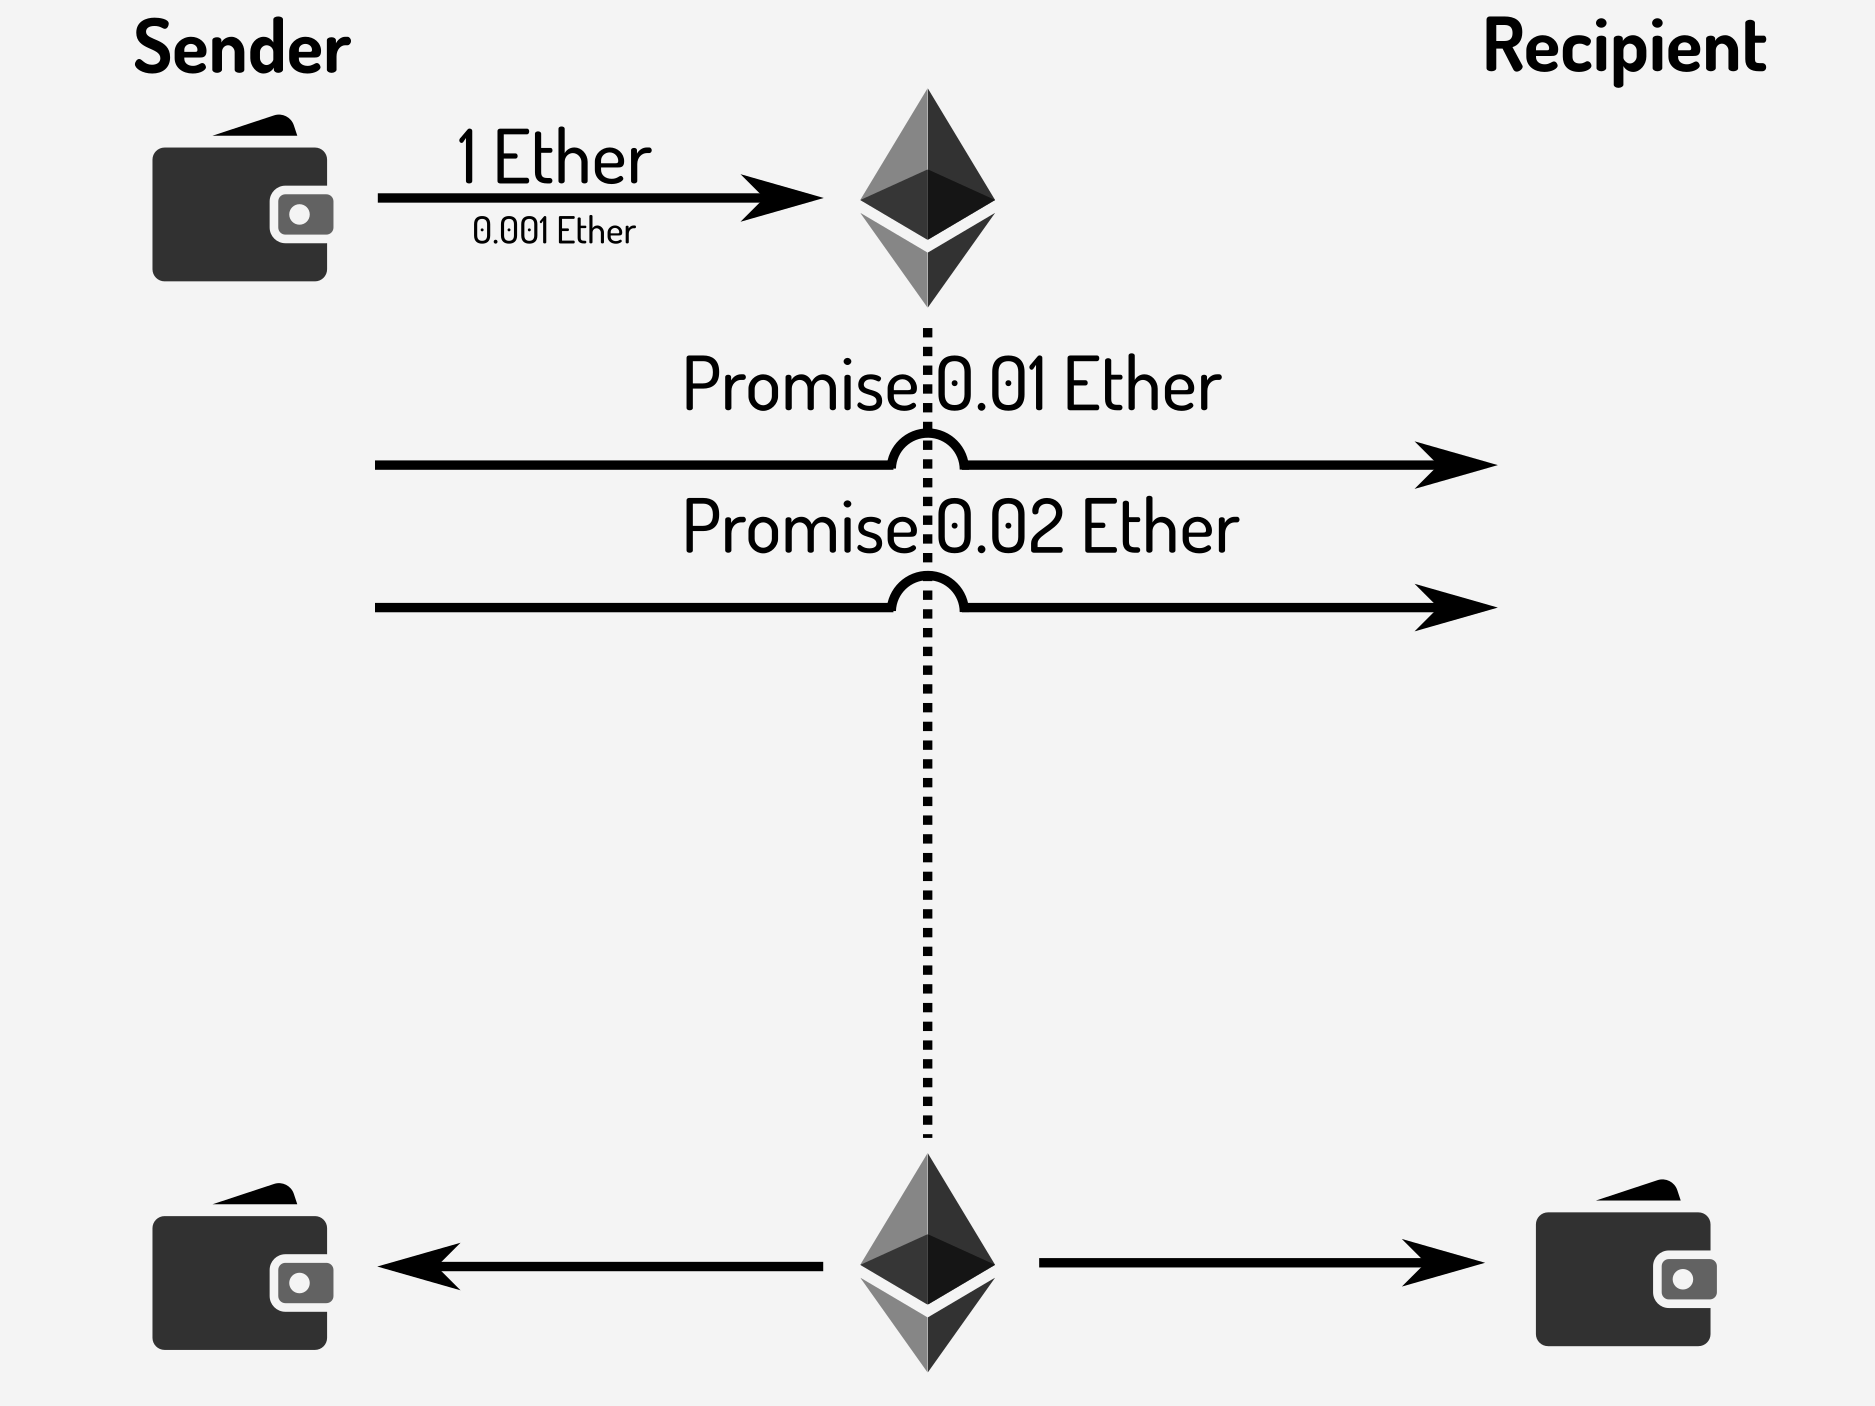 Sender transmits another off-chain promise to recipient